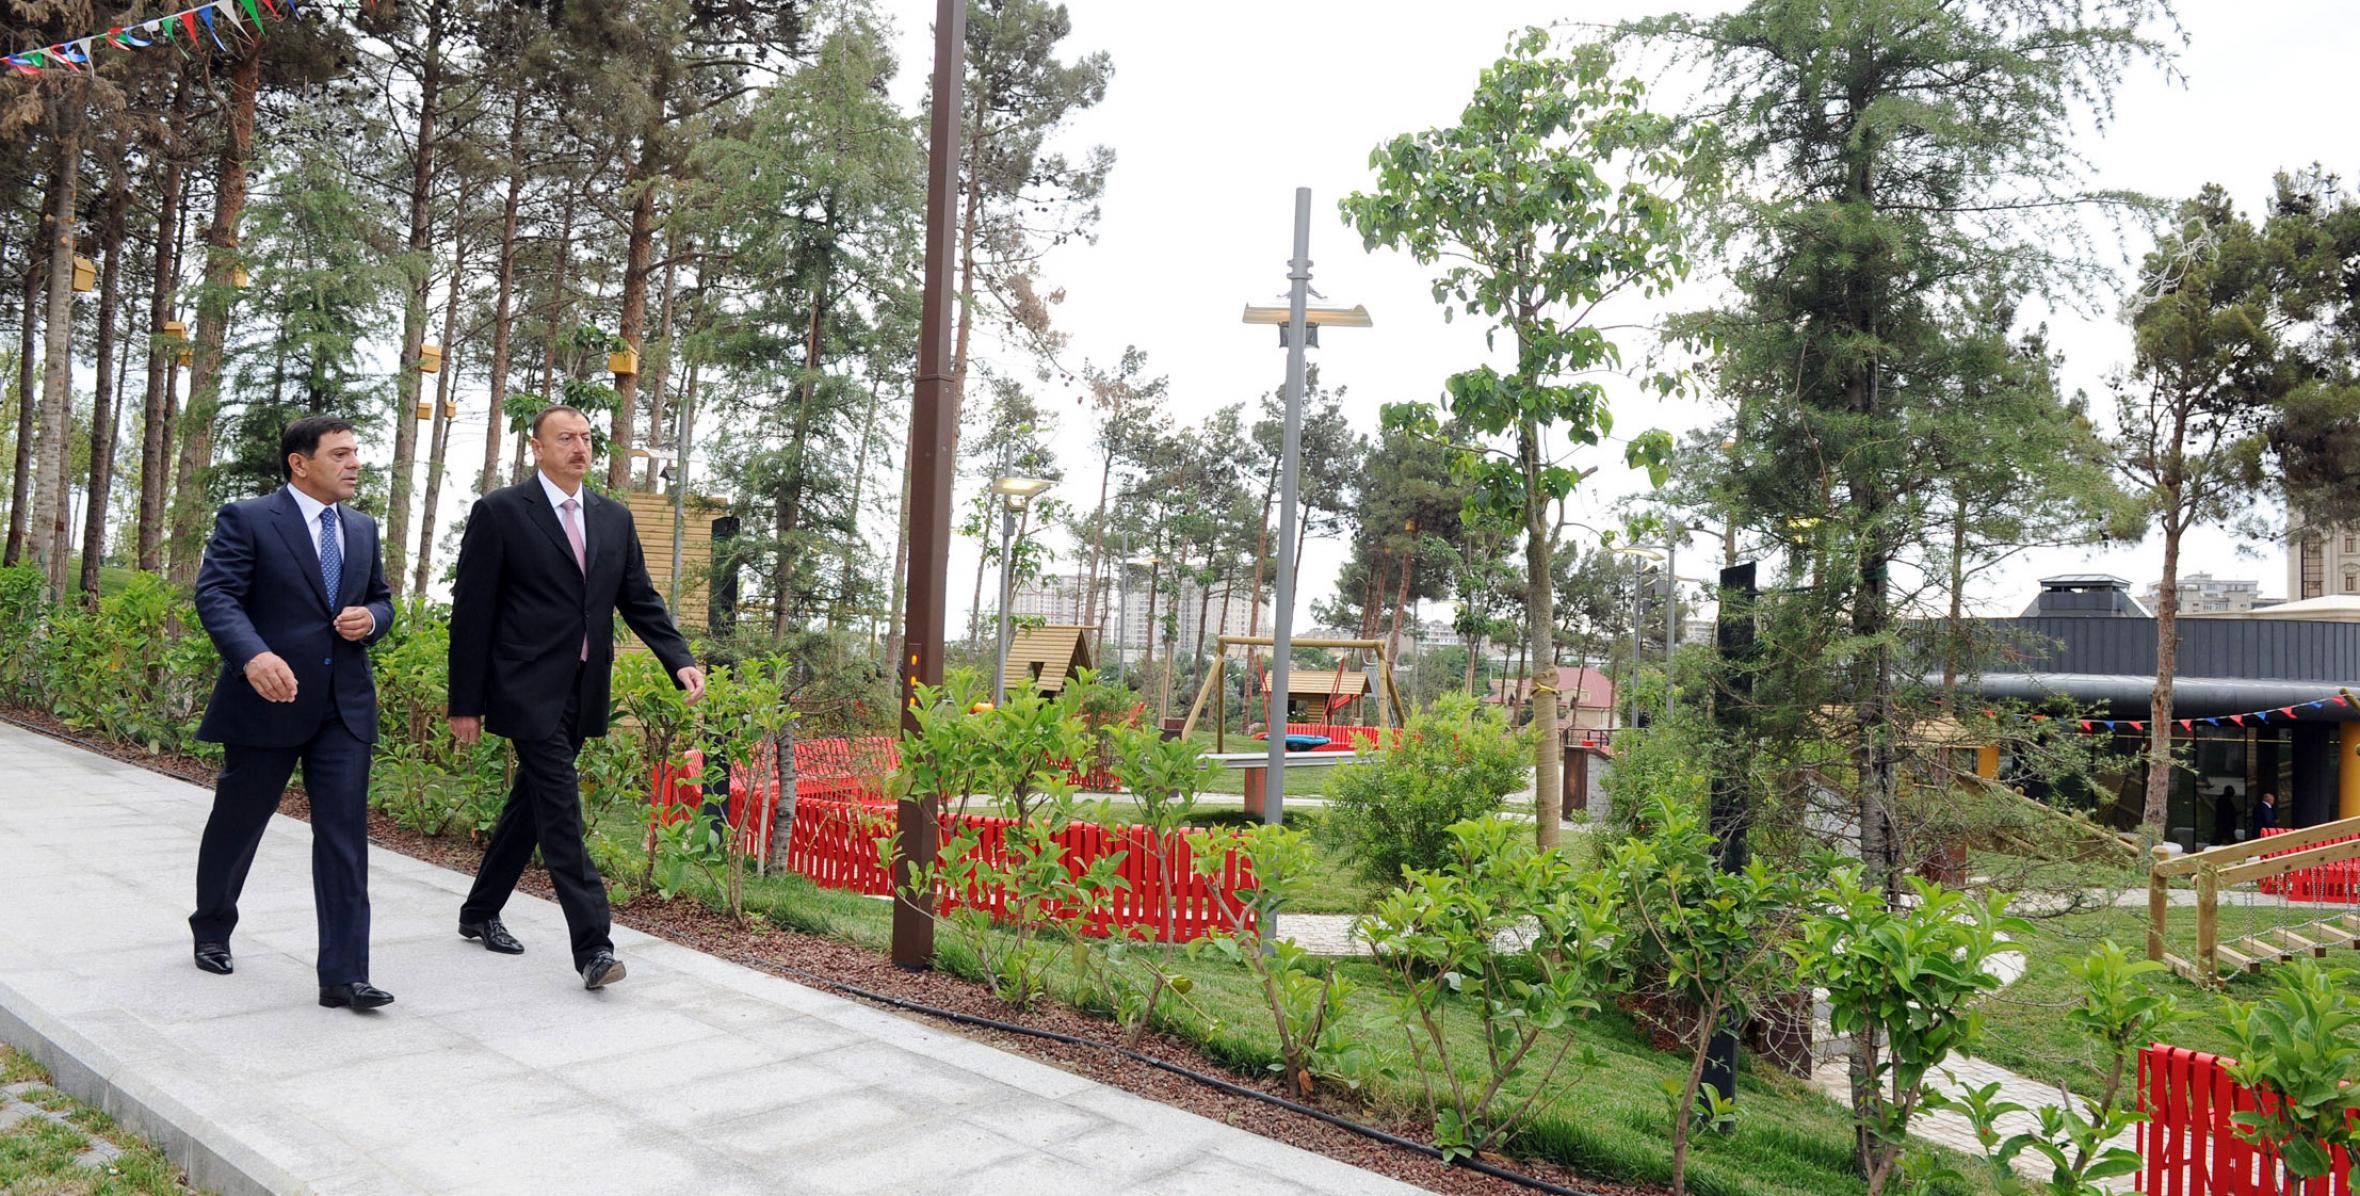 Ilham Aliyev reviewed the reconstructed culture and recreation park named after Heydar Aliyev in the Binagadi district of Baku